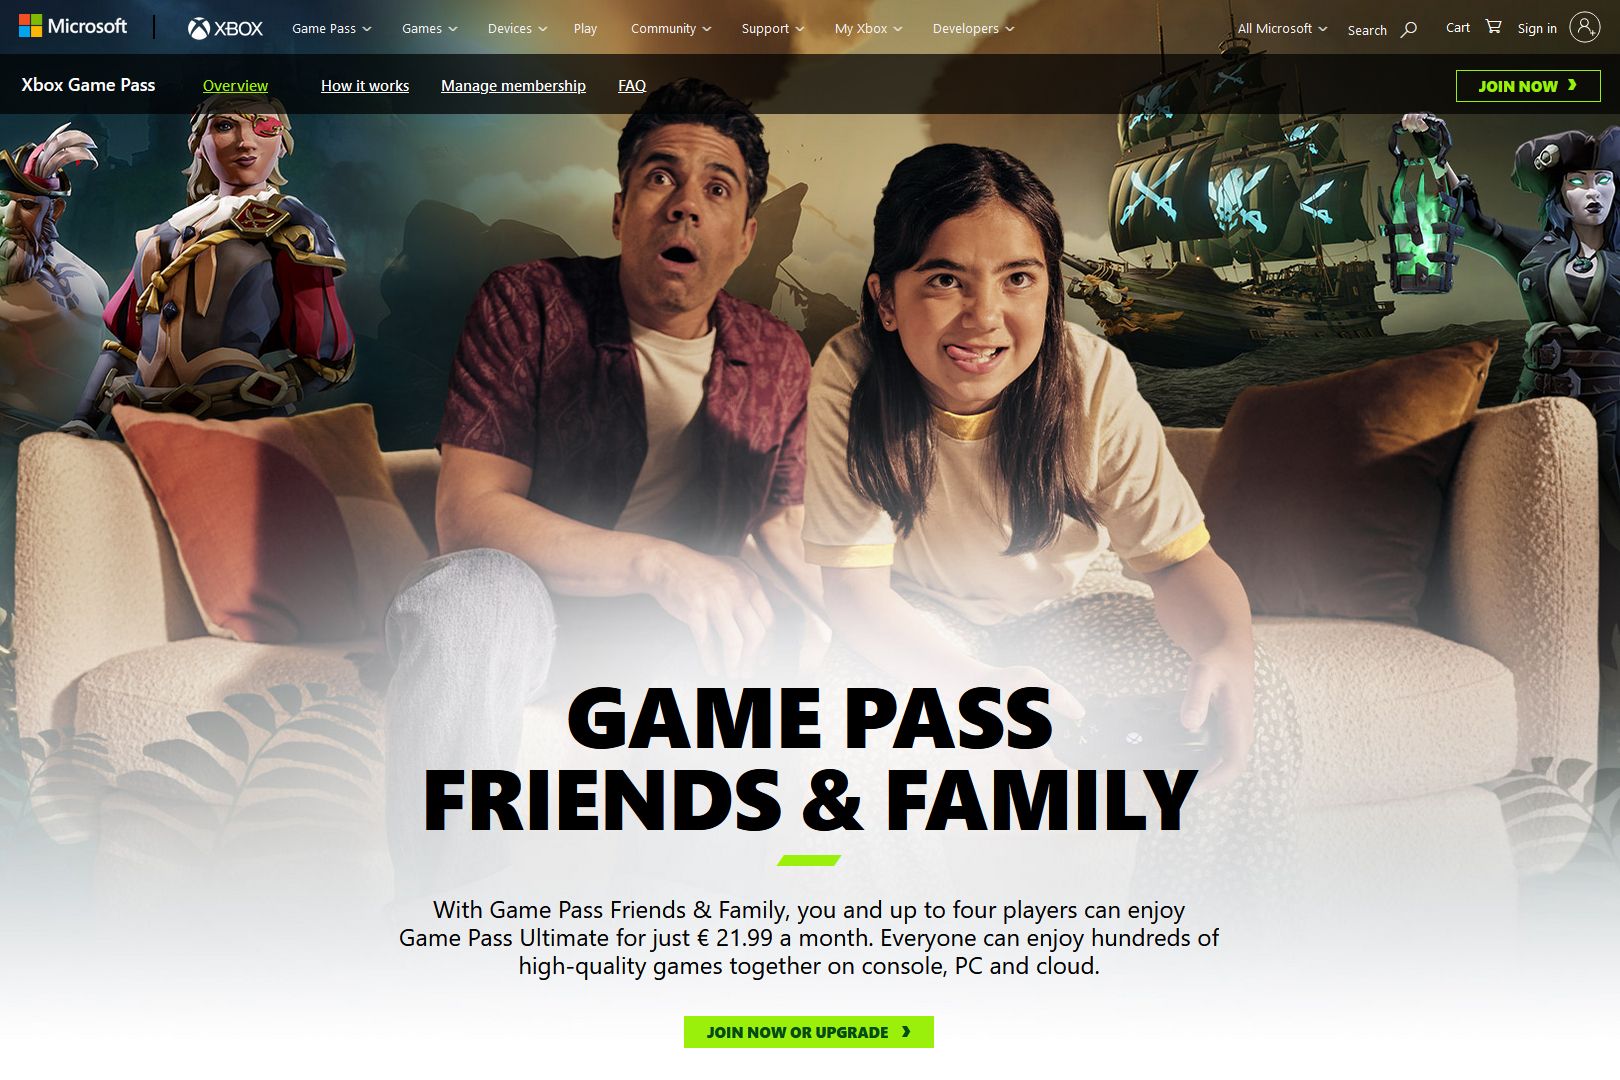 xbox-game-pass-friends-&-family